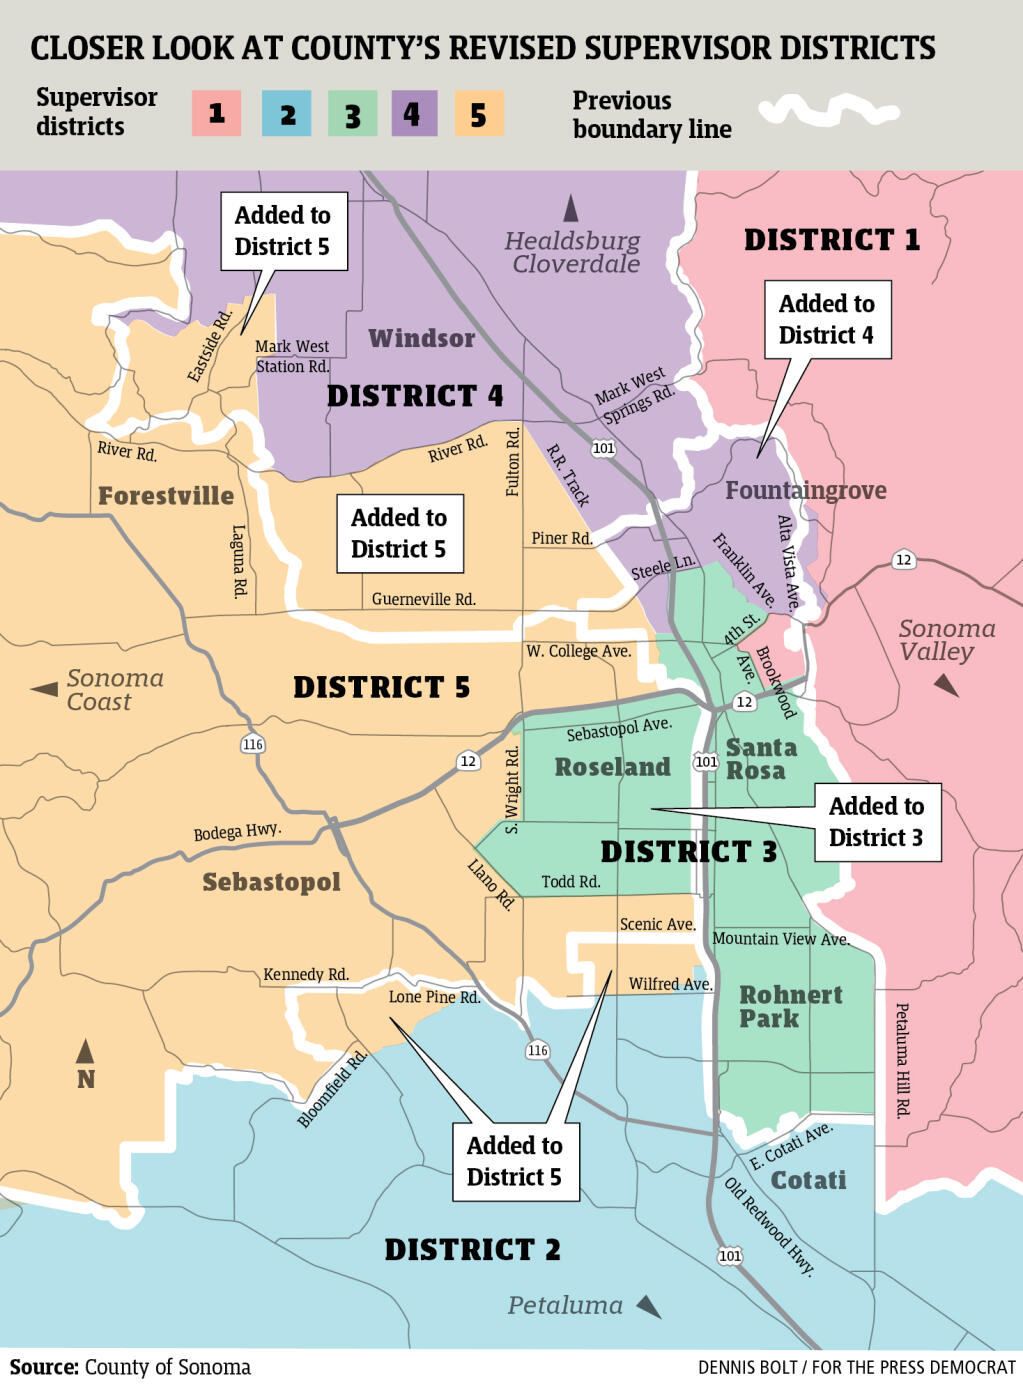 The new Sonoma County Board of Supervisors district map, adopted Dec. 14, 2021 and set to go into effect Jan. 13, 2022. The shown area illustrates most major changes made in and around Santa Rosa and Rohnert Park. (Dennis Bolt/For The Press Democrat)